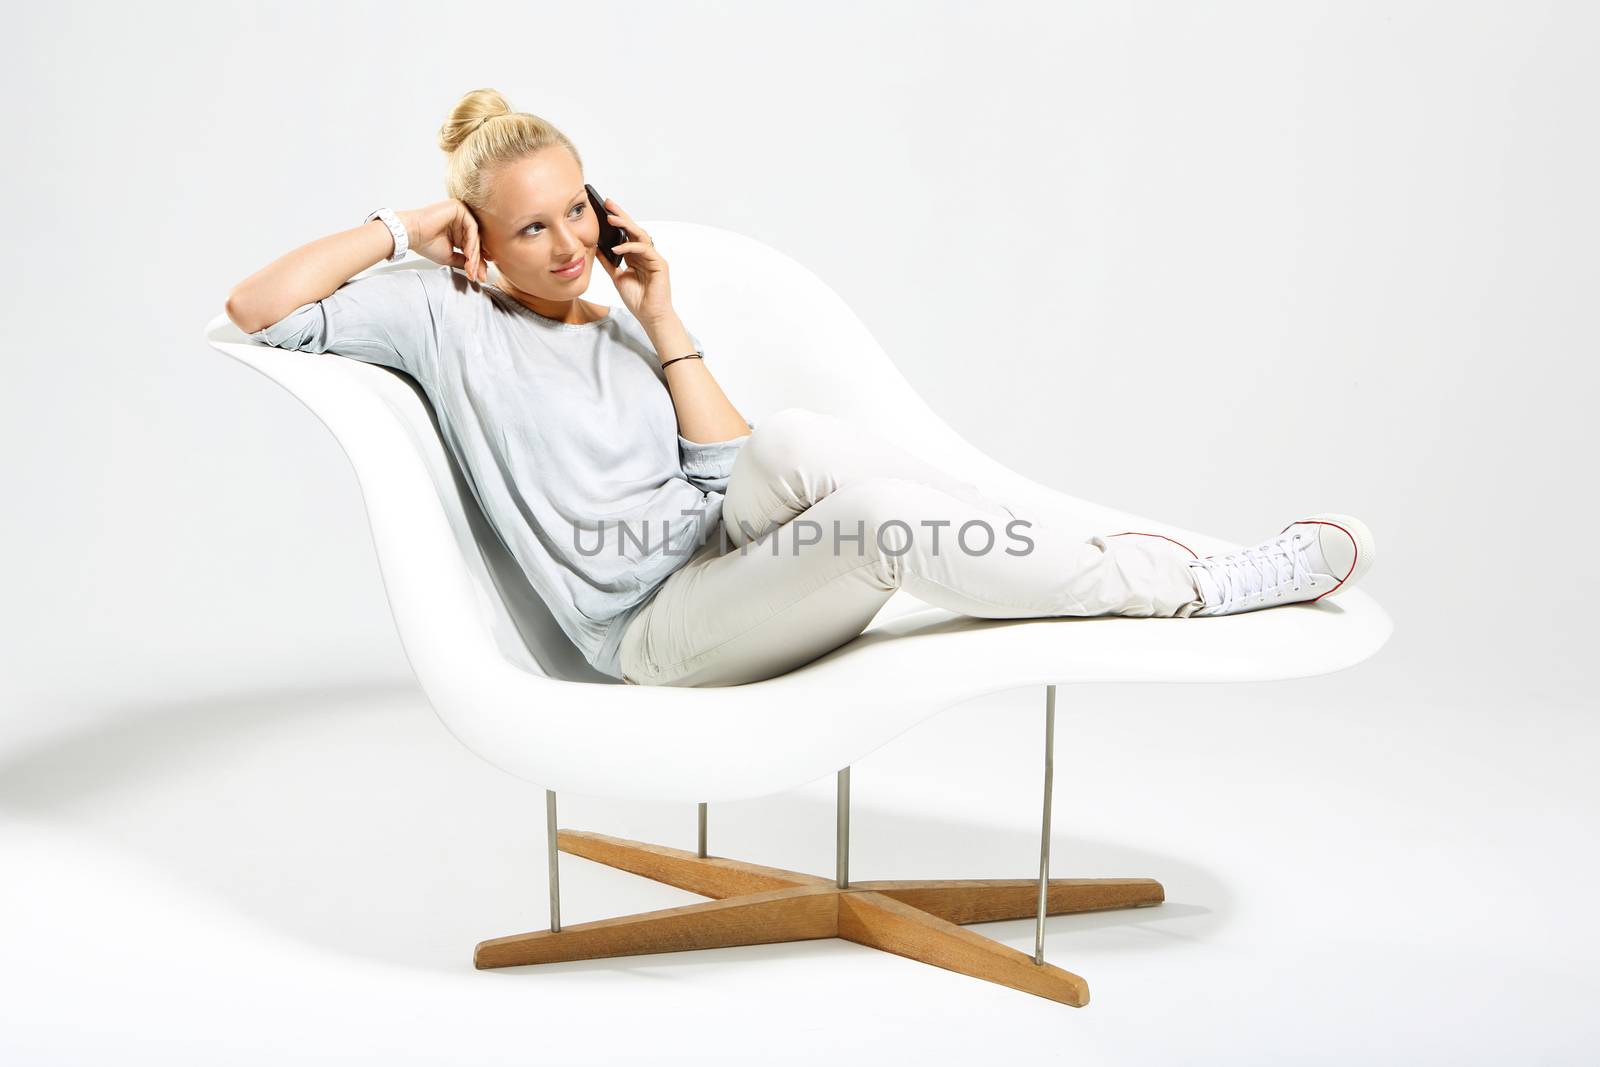 Blonde talking on mobile phone while sitting on a stylish white chair by robert_przybysz